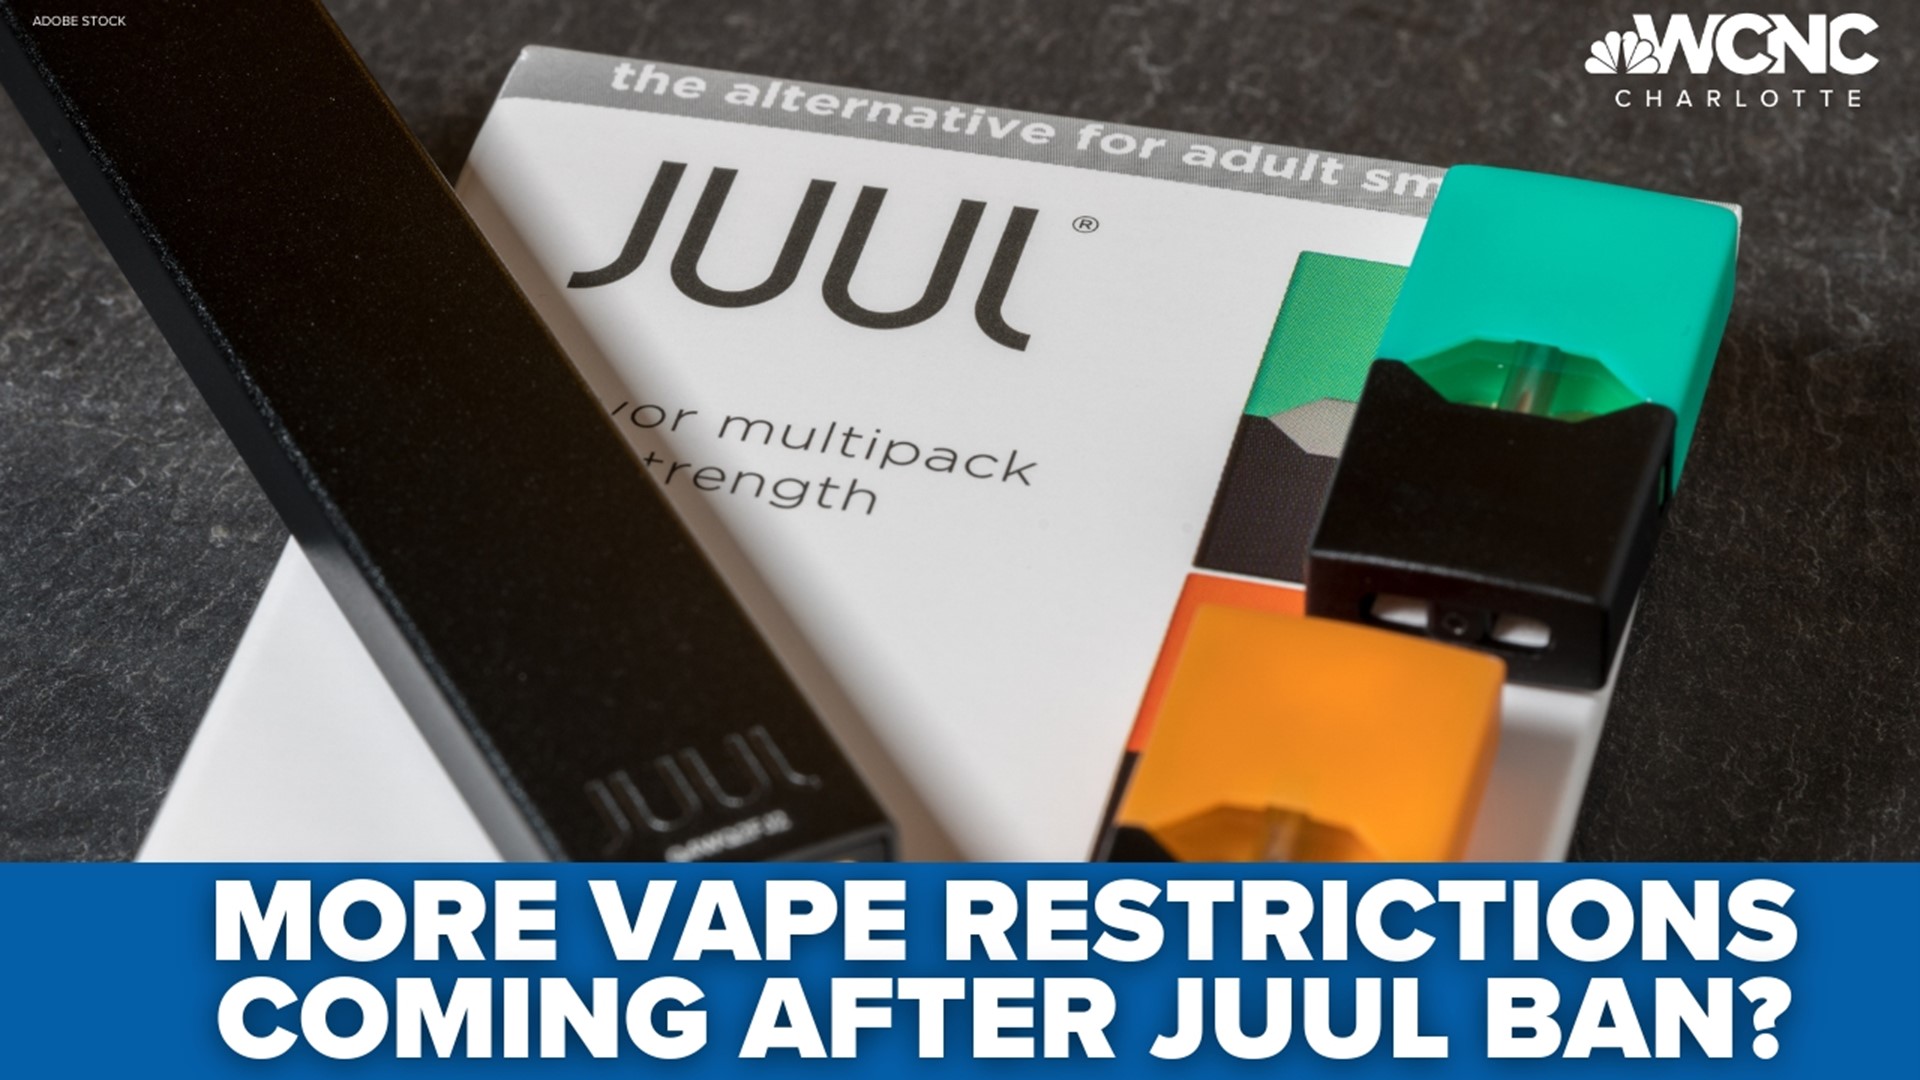 Federal health officials on Thursday ordered Juul to pull its electronic cigarettes from the U.S. market, the latest blow to the embattled company.